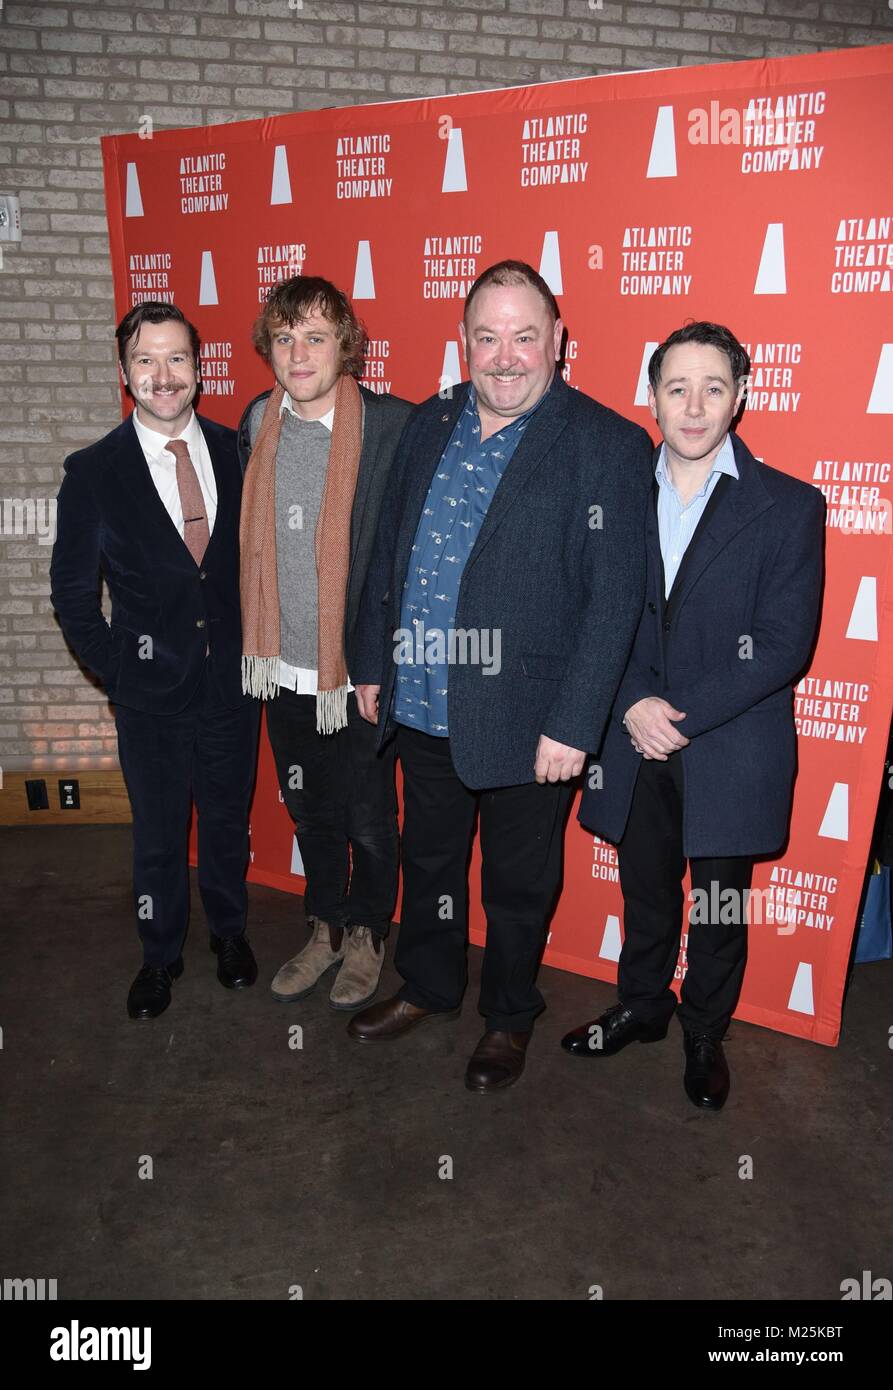 New York, NY, USA. 5th Feb, 2018. Billy Carter, Johnny Flynn, Mark Addy, Reece Shersmith at arrivals for HANGMEN Opening Night Curtain Call and Party, Linda Gross Theater, New York, NY February 5, 2018. Credit: Derek Storm/Everett Collection/Alamy Live News Stock Photo